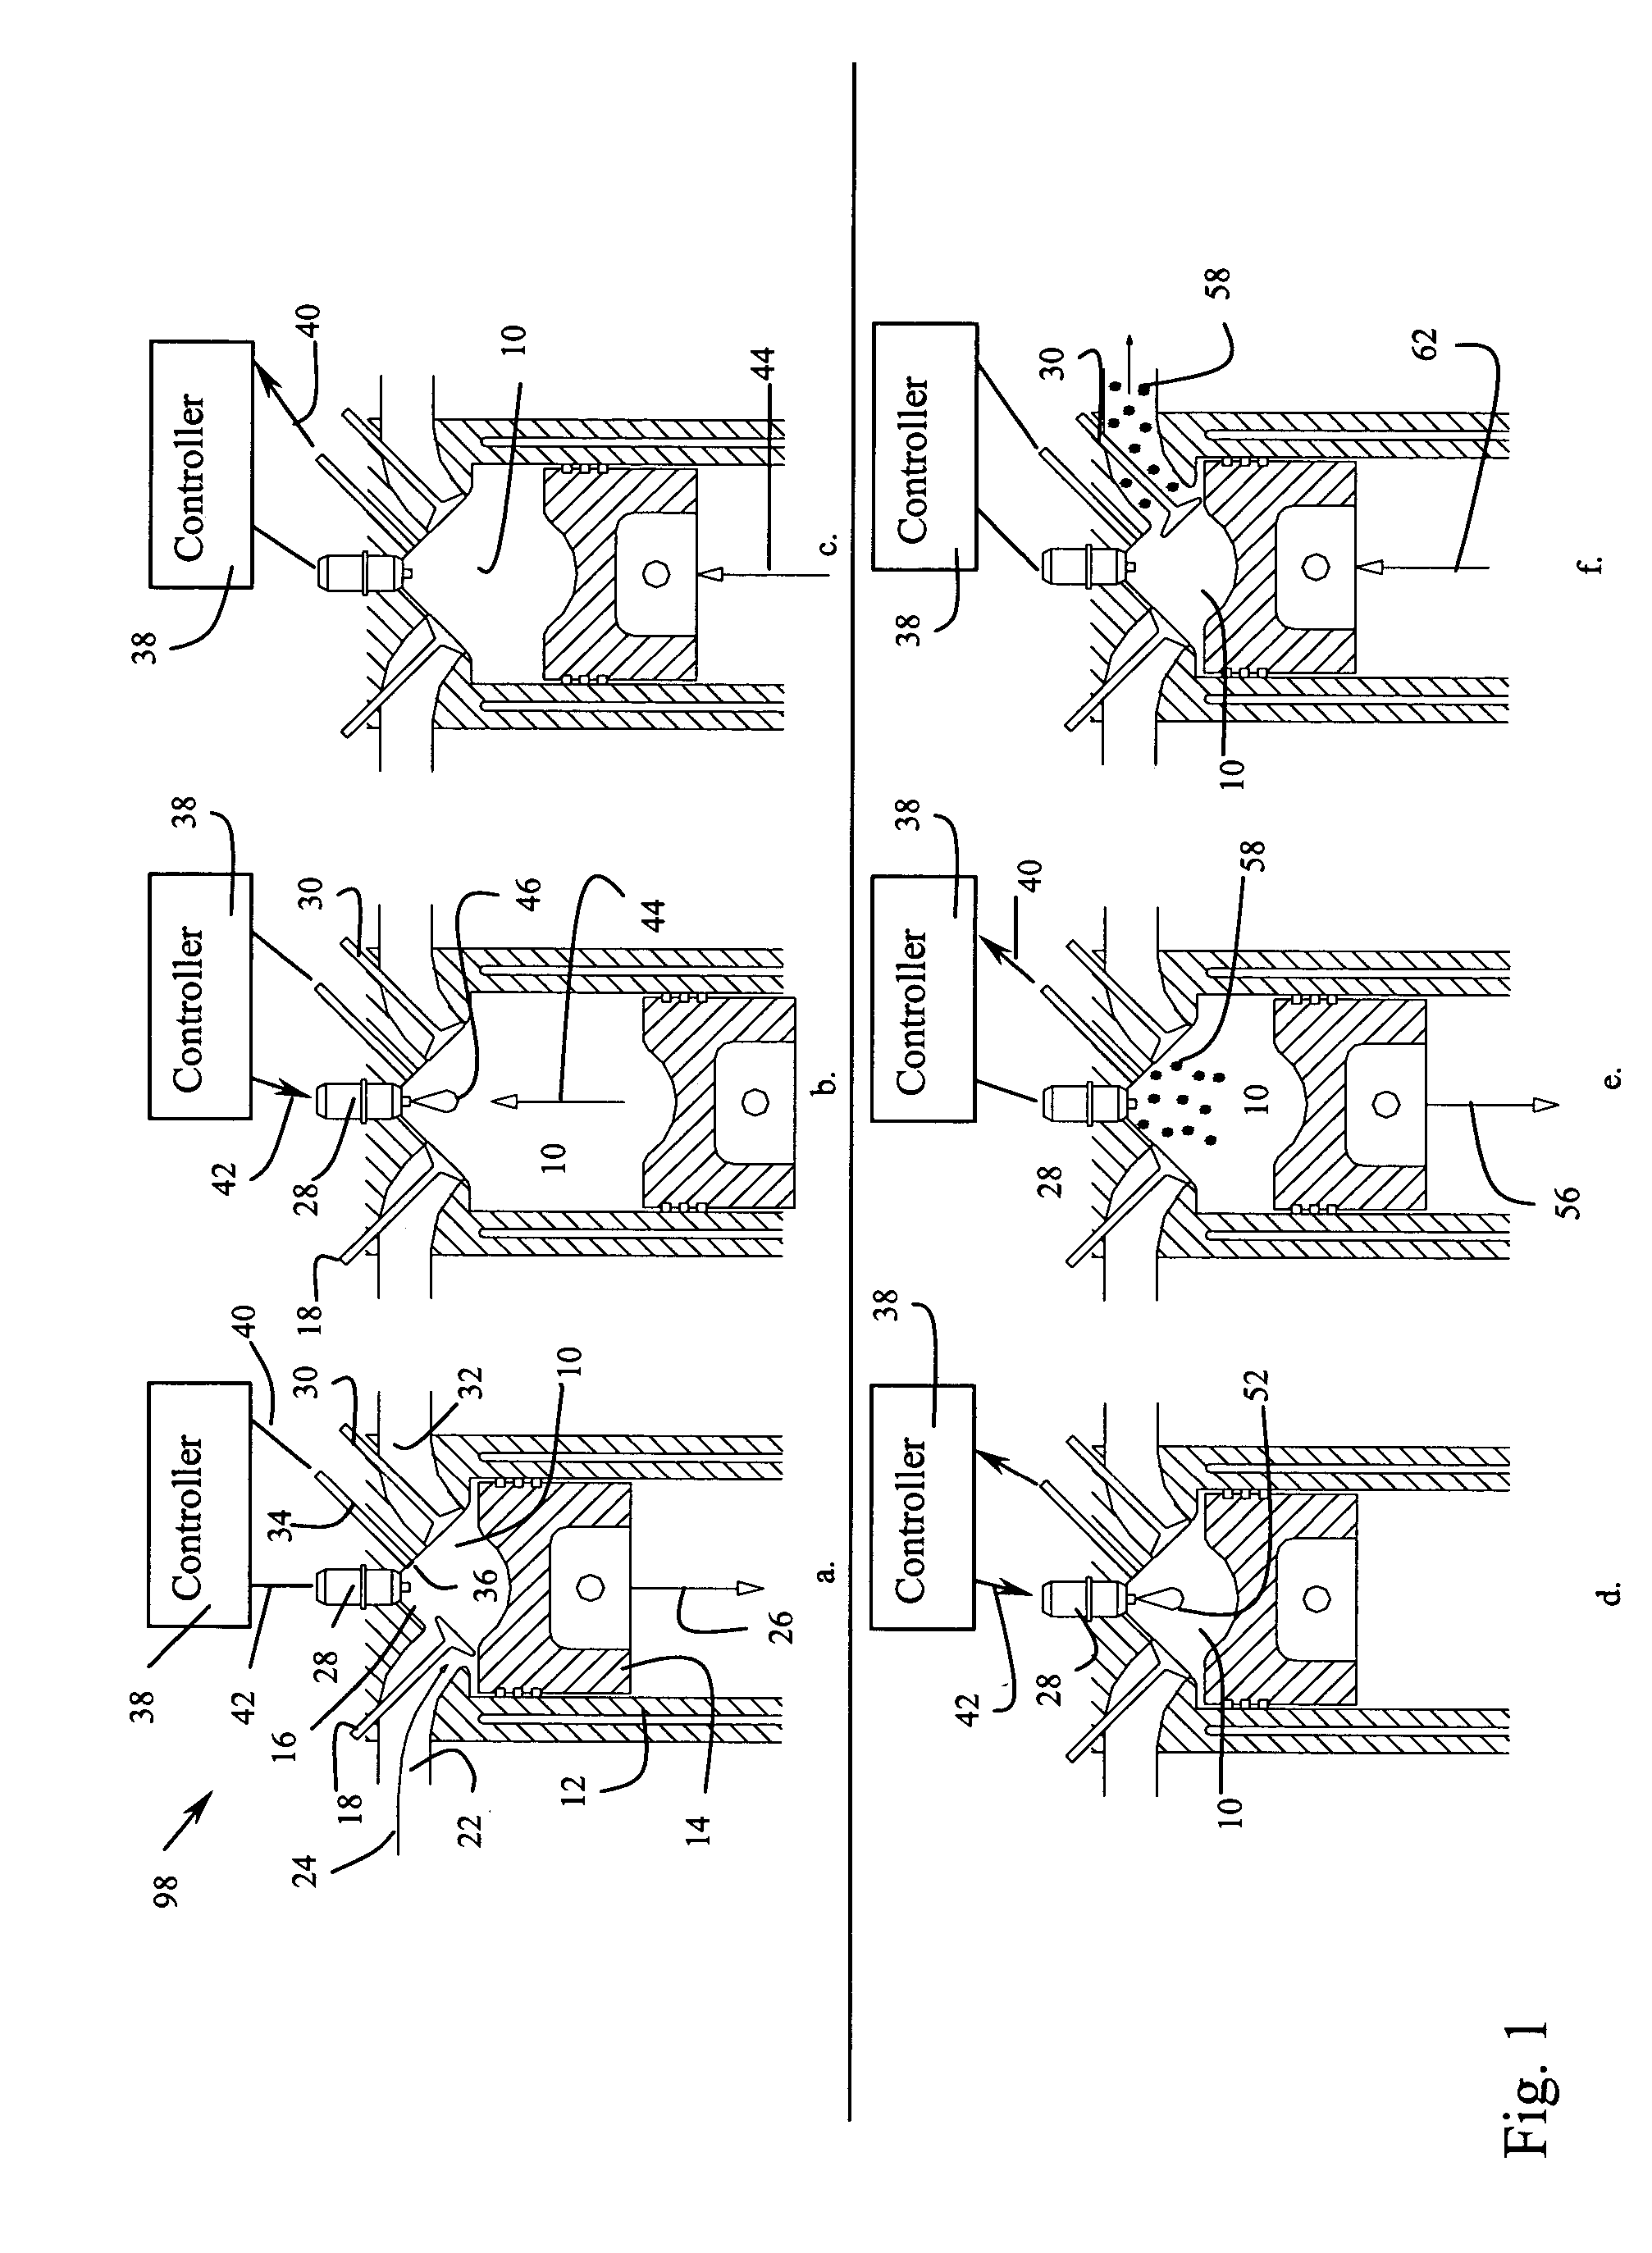 Method and apparatus for controlling an internal combustion engine using combustion chamber pressure sensing